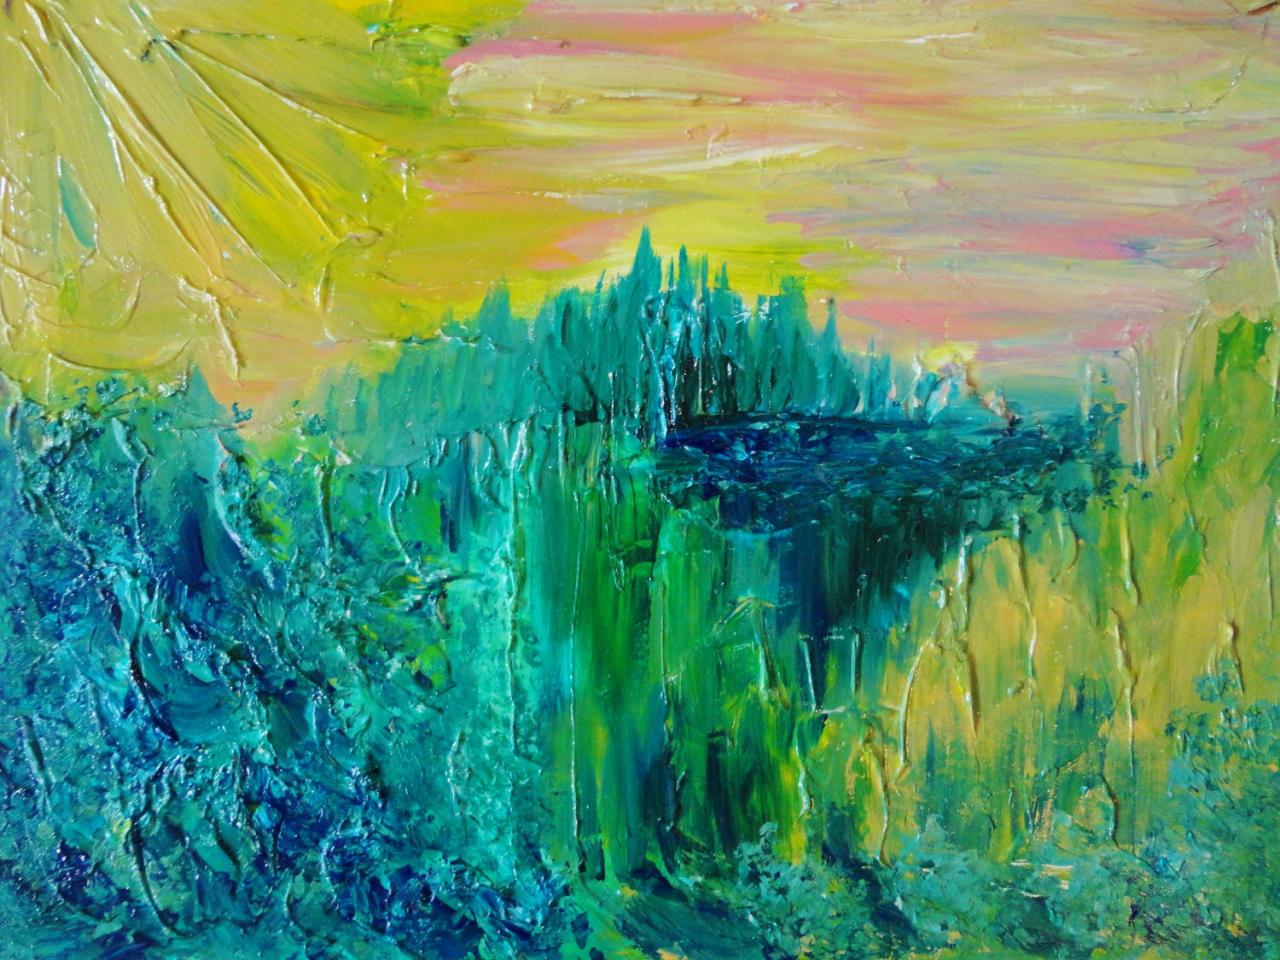 - Dream Abstract Acrylic Painting Impasto Landscape 16 X 20 Green Forest Trees, Nature Pink Yellow Peach Kelly Green Teal